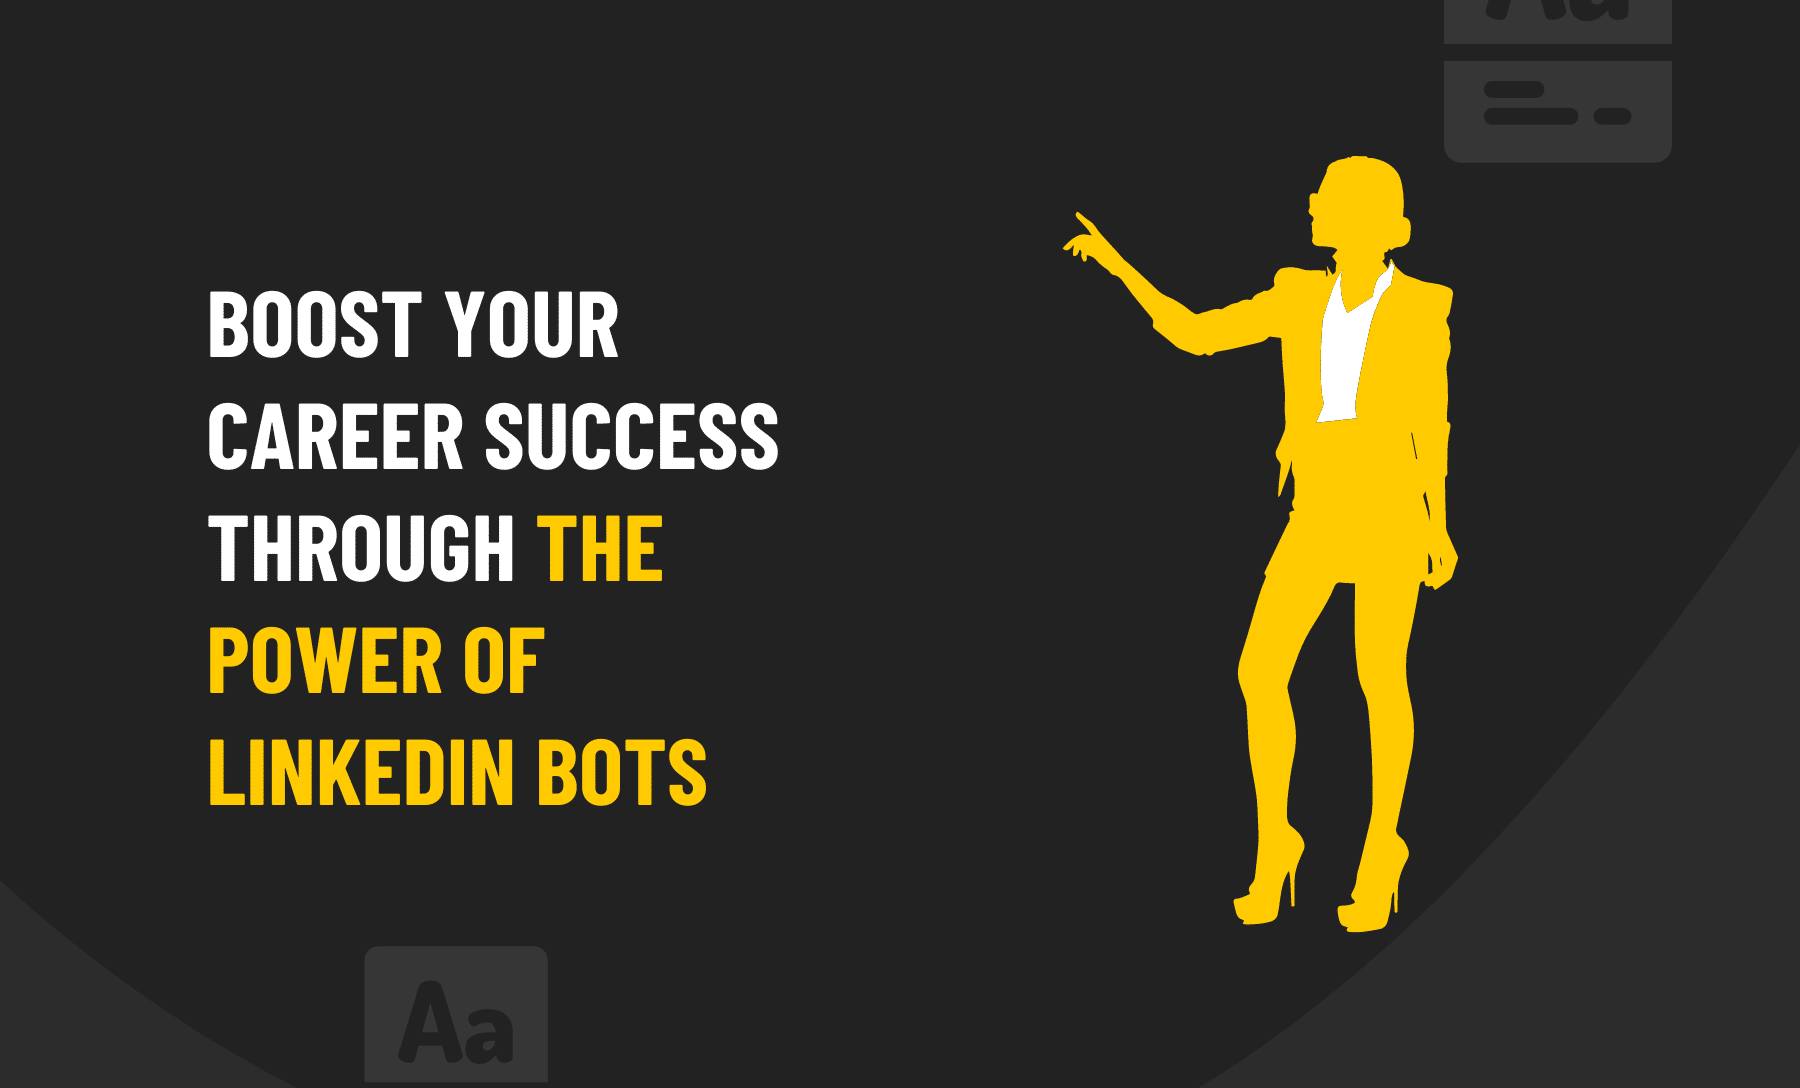 Boost your career success through the power of linkedin bots